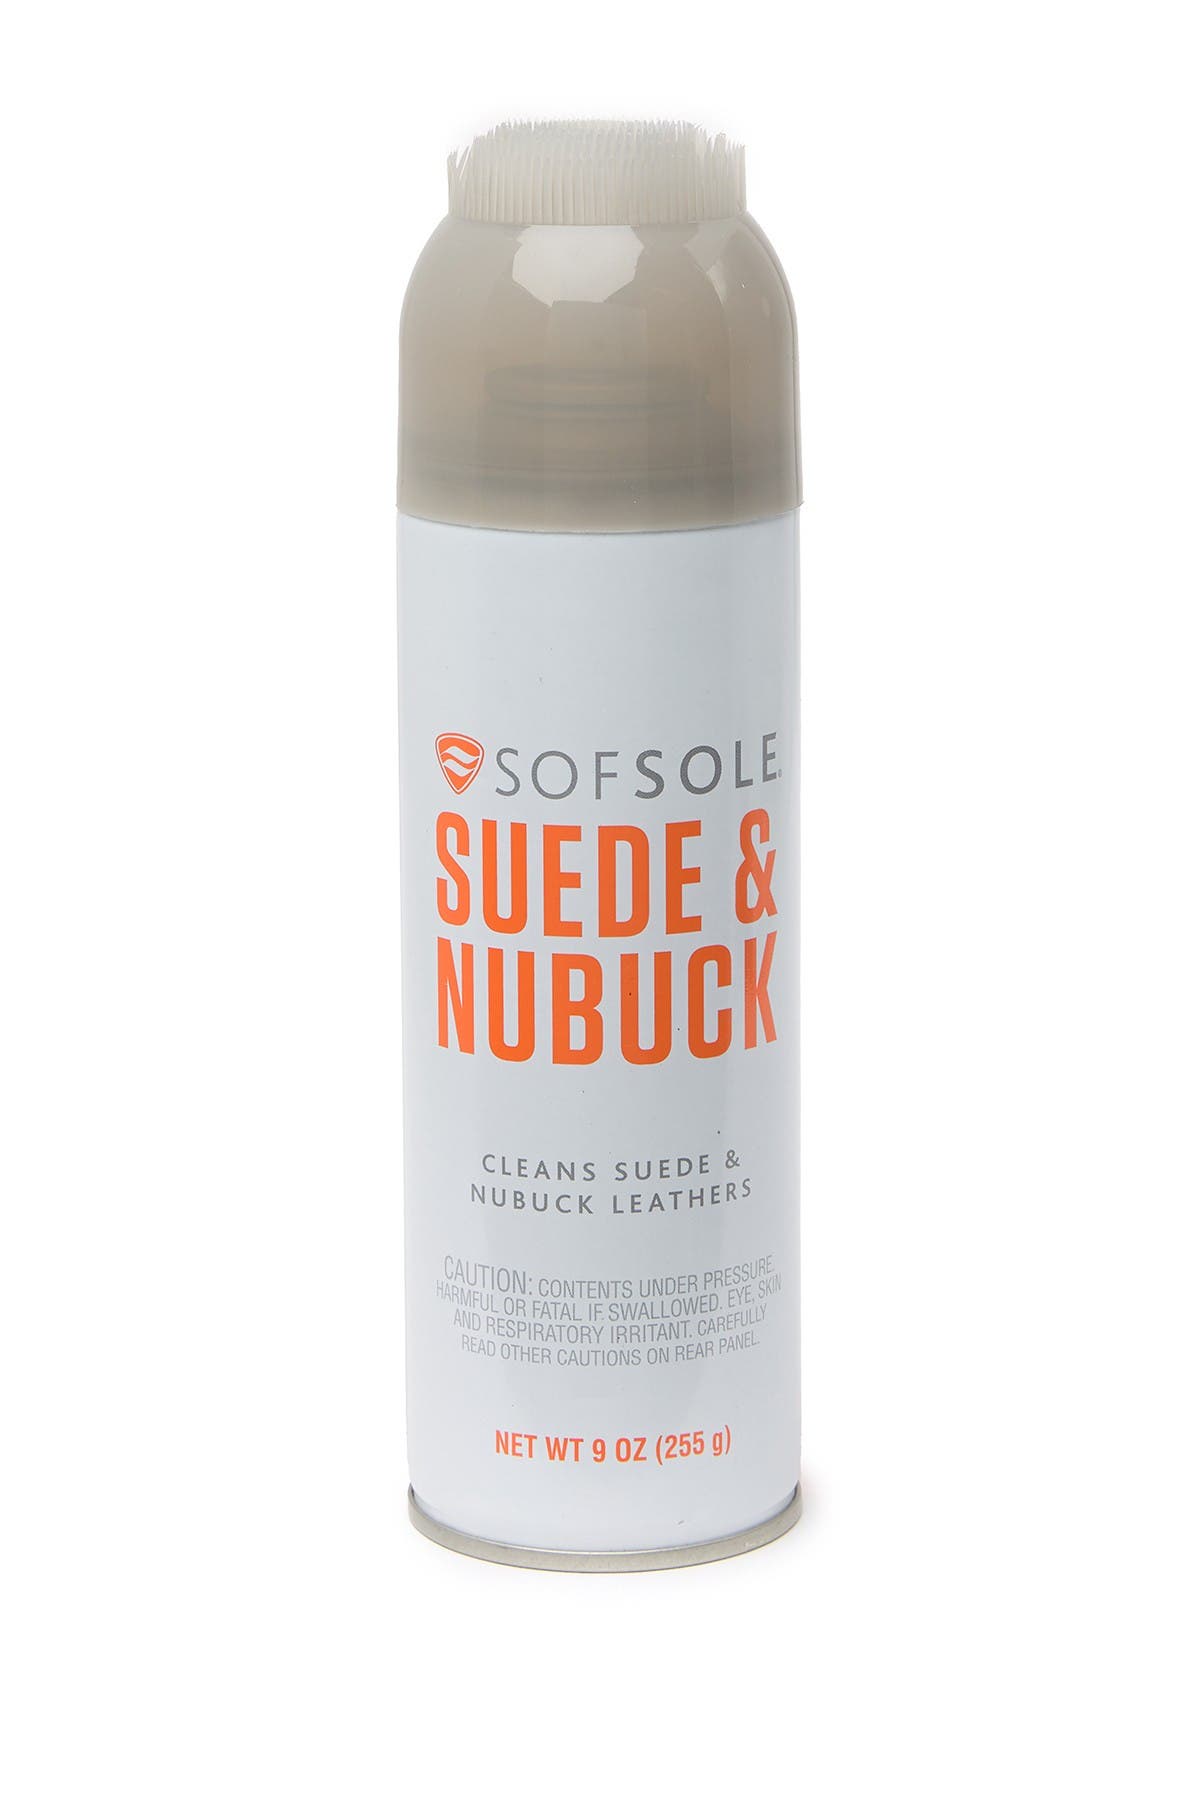 sof sole suede and nubuck cleaner review